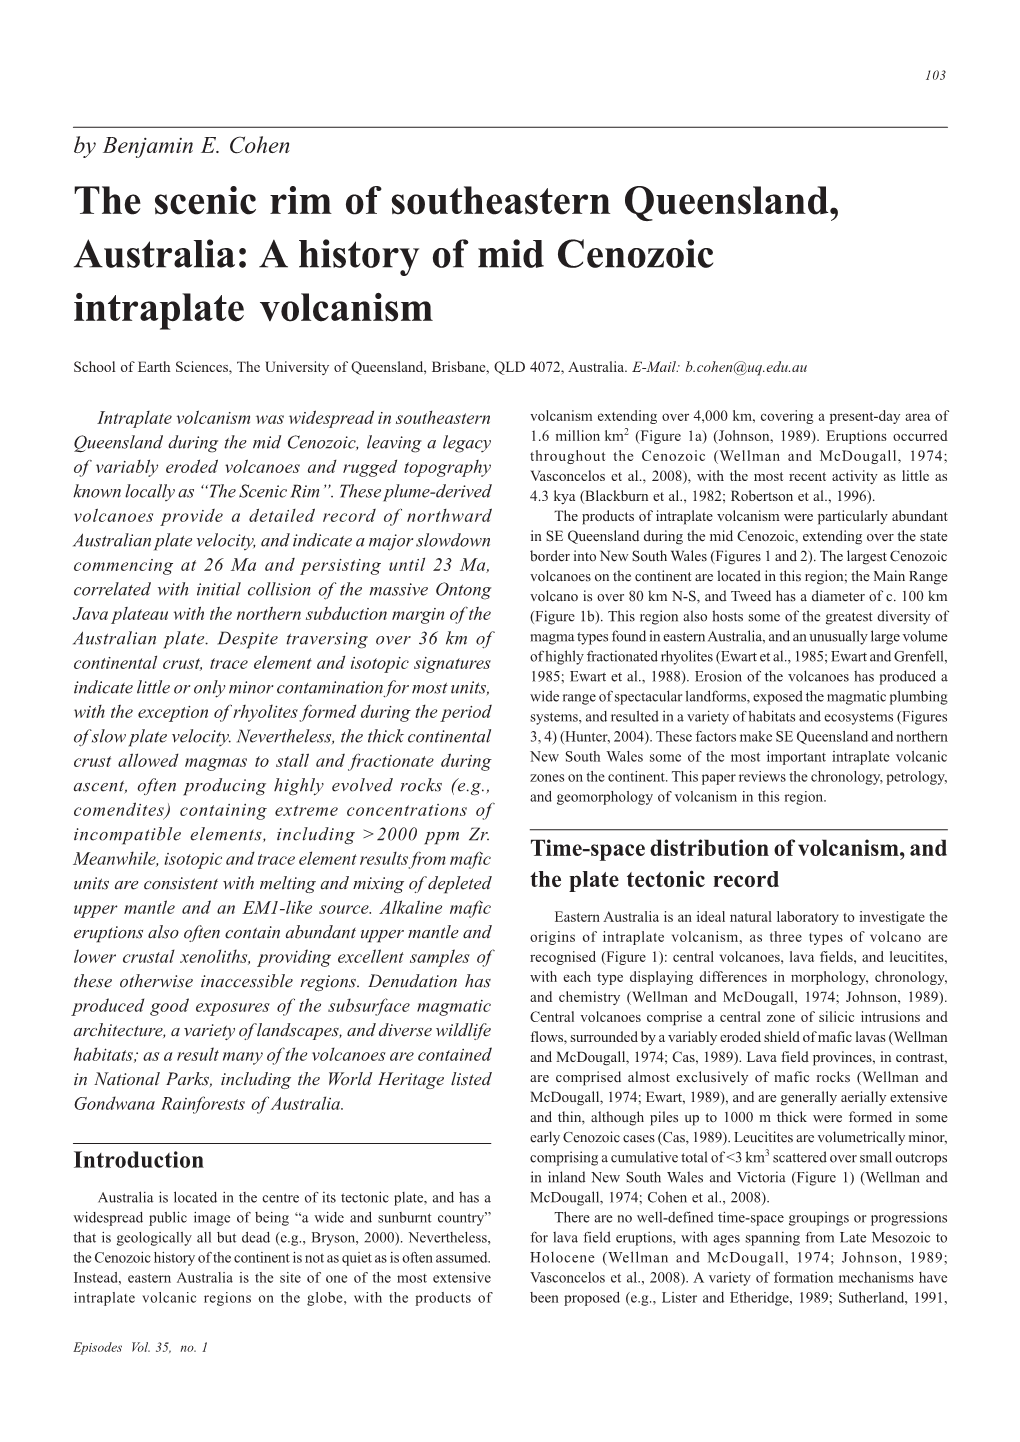 The Scenic Rim of Southeastern Queensland, Australia: a History of Mid Cenozoic Intraplate Volcanism